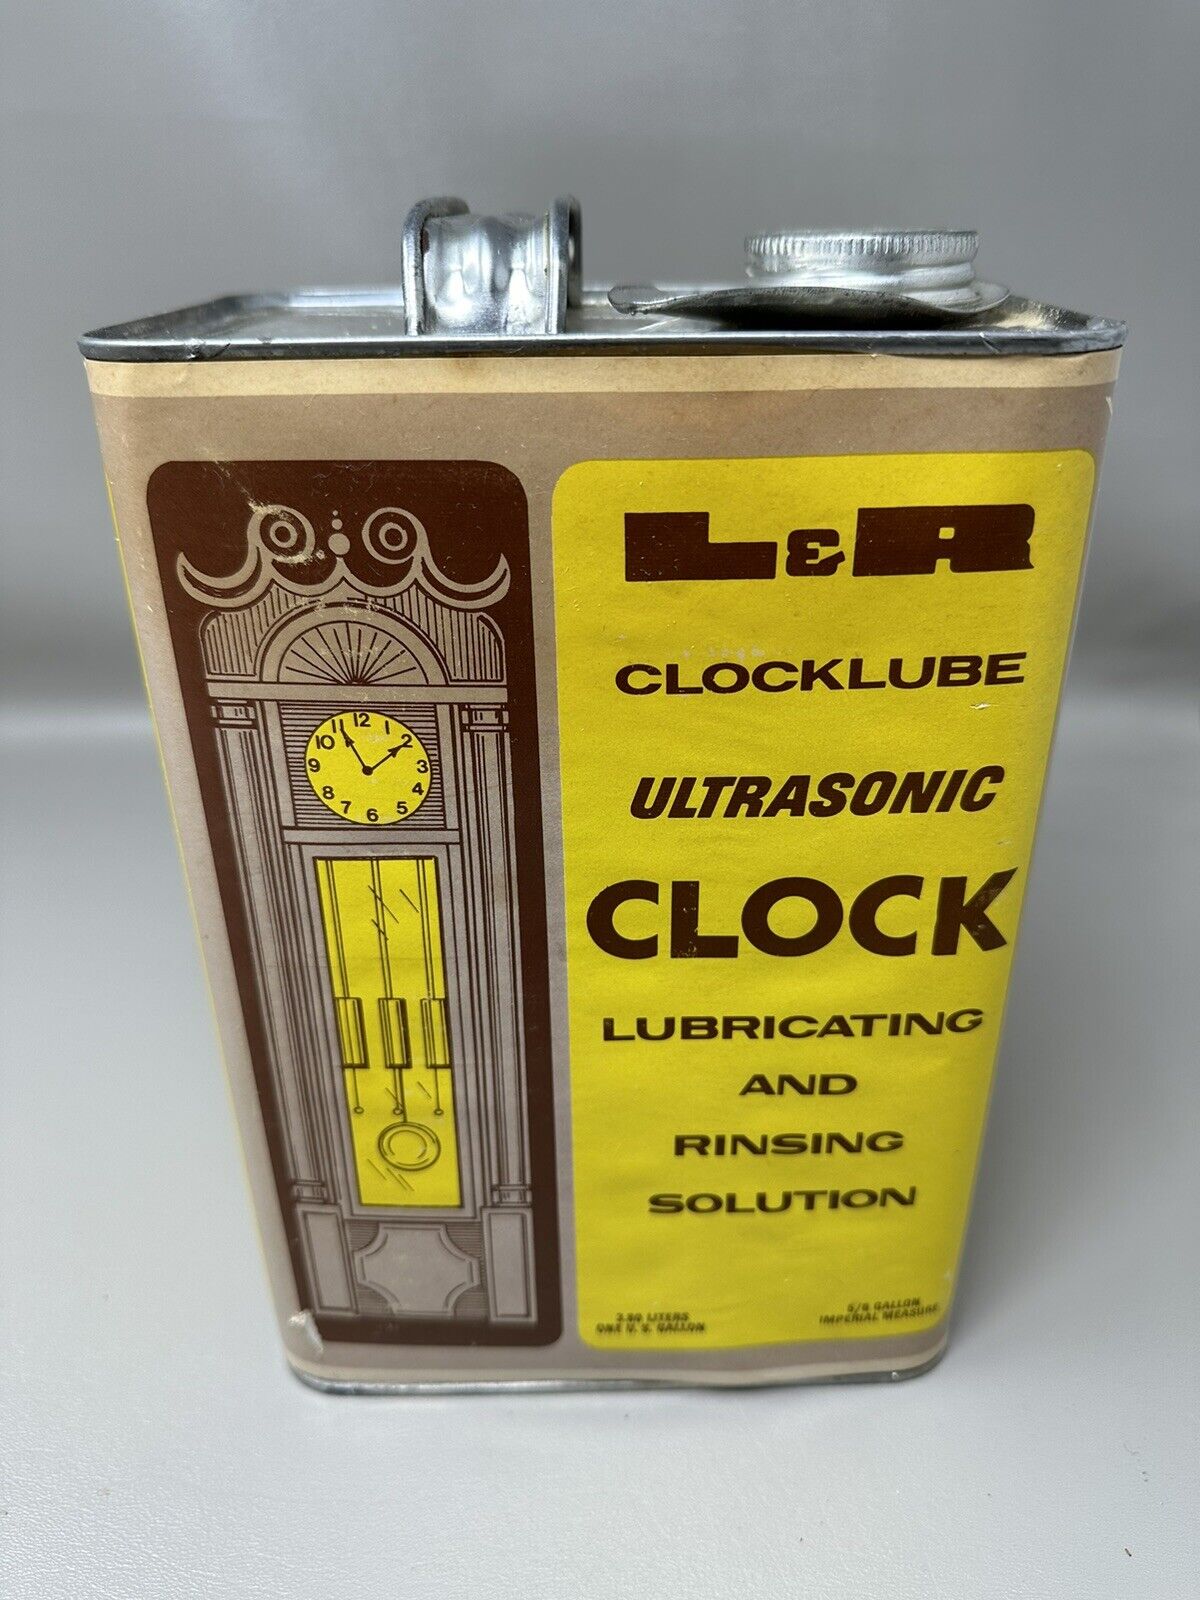 L & R Clock Lube Ultrasonic Lubricating and Rinsing Solution 1 Gallon Metal Can